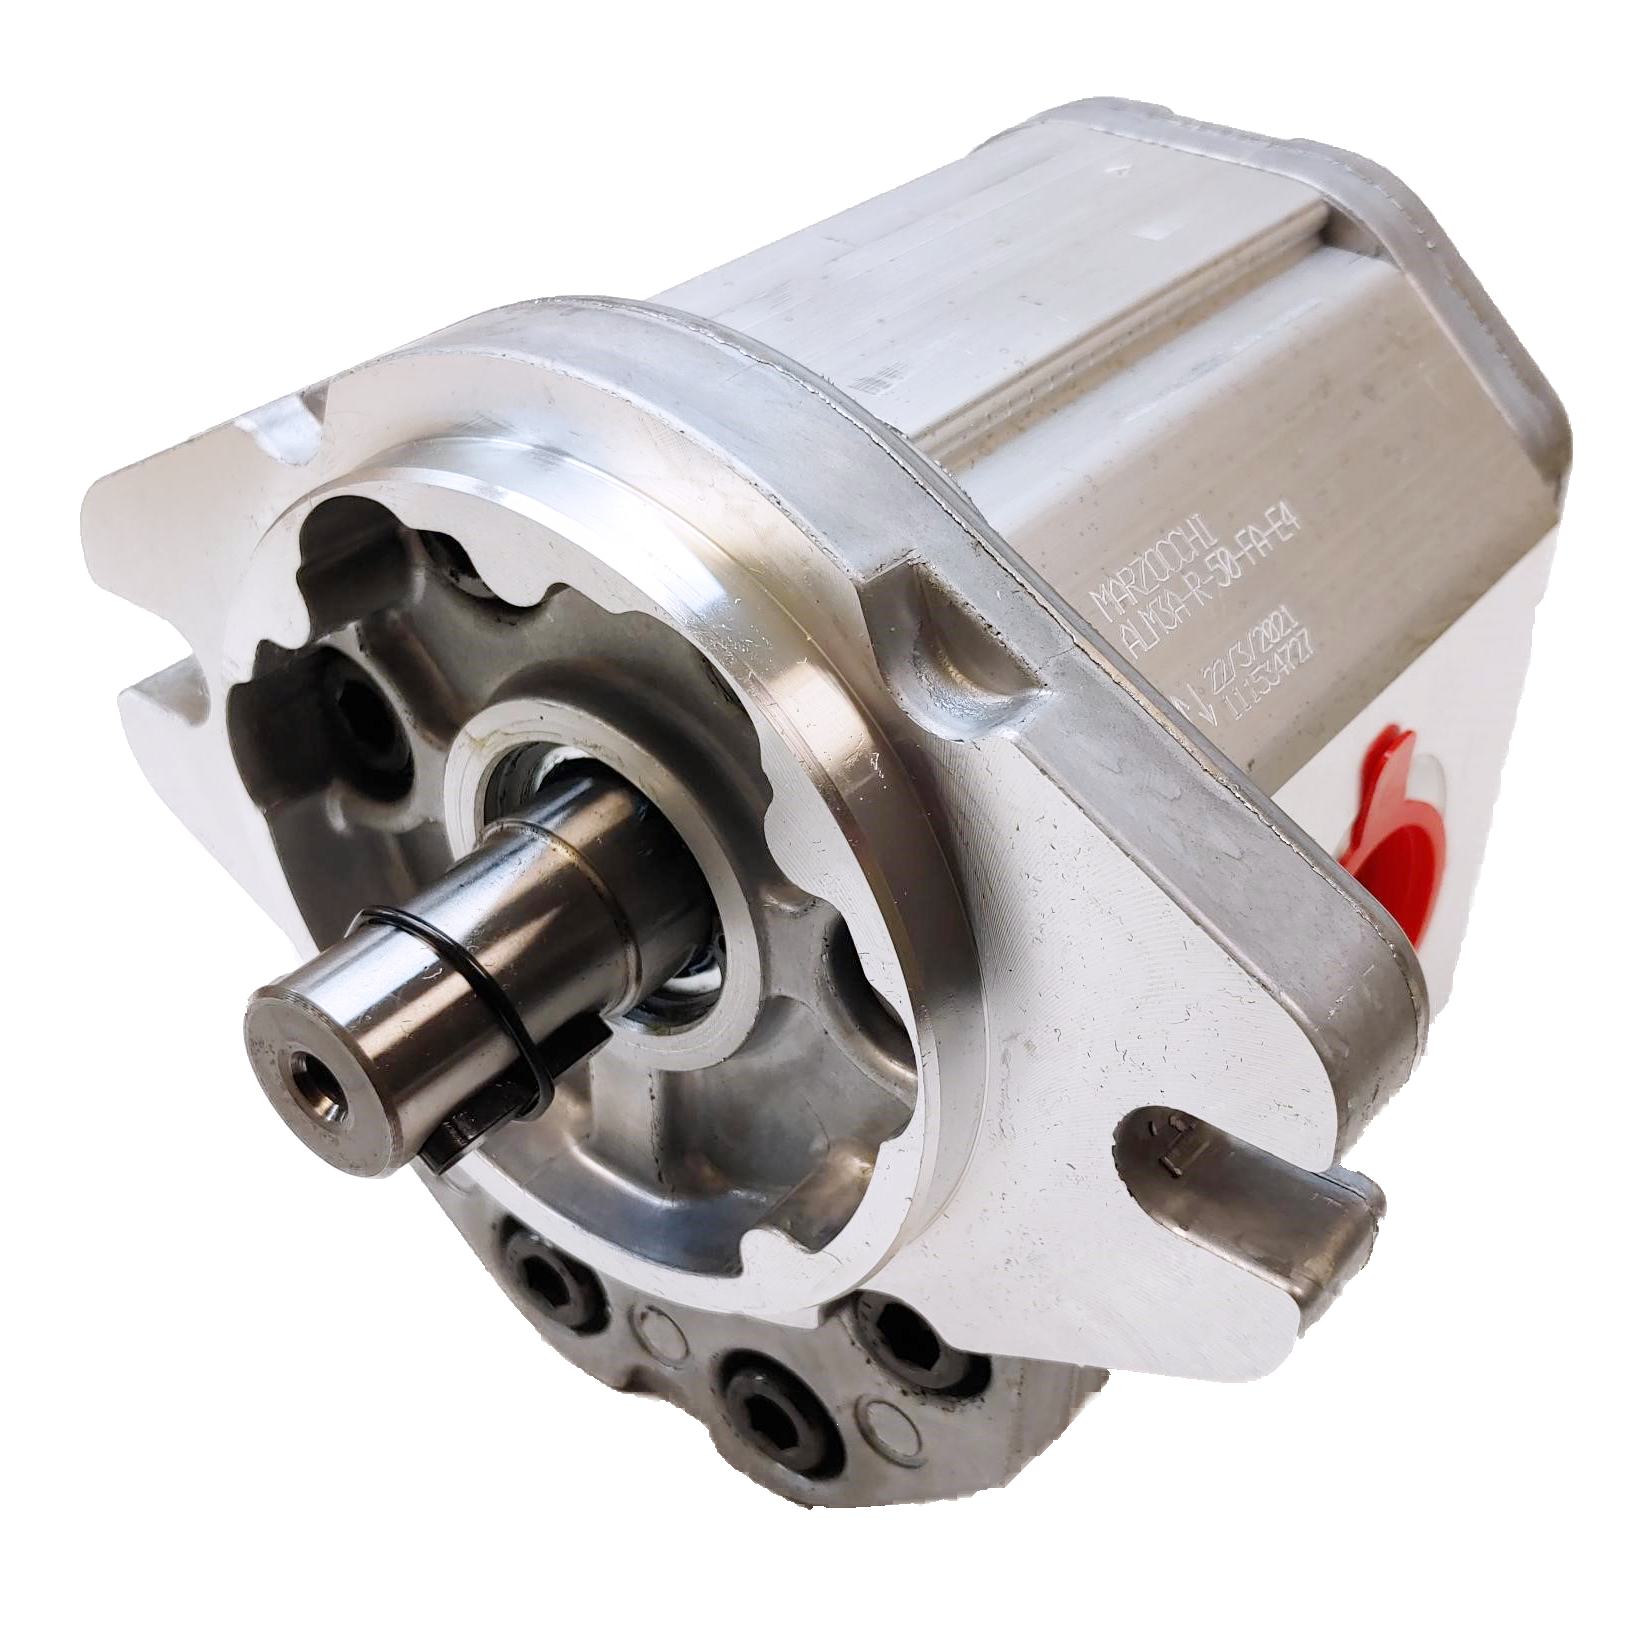 ALM3A-R-80-S1-FA-E4 : Marzocchi Gear Motor, Bidirectional, 52cc, 2900psi rated, 2500RPM, 1.25" (#20) SAE ports, 9T 16/32DP Splined Shaft